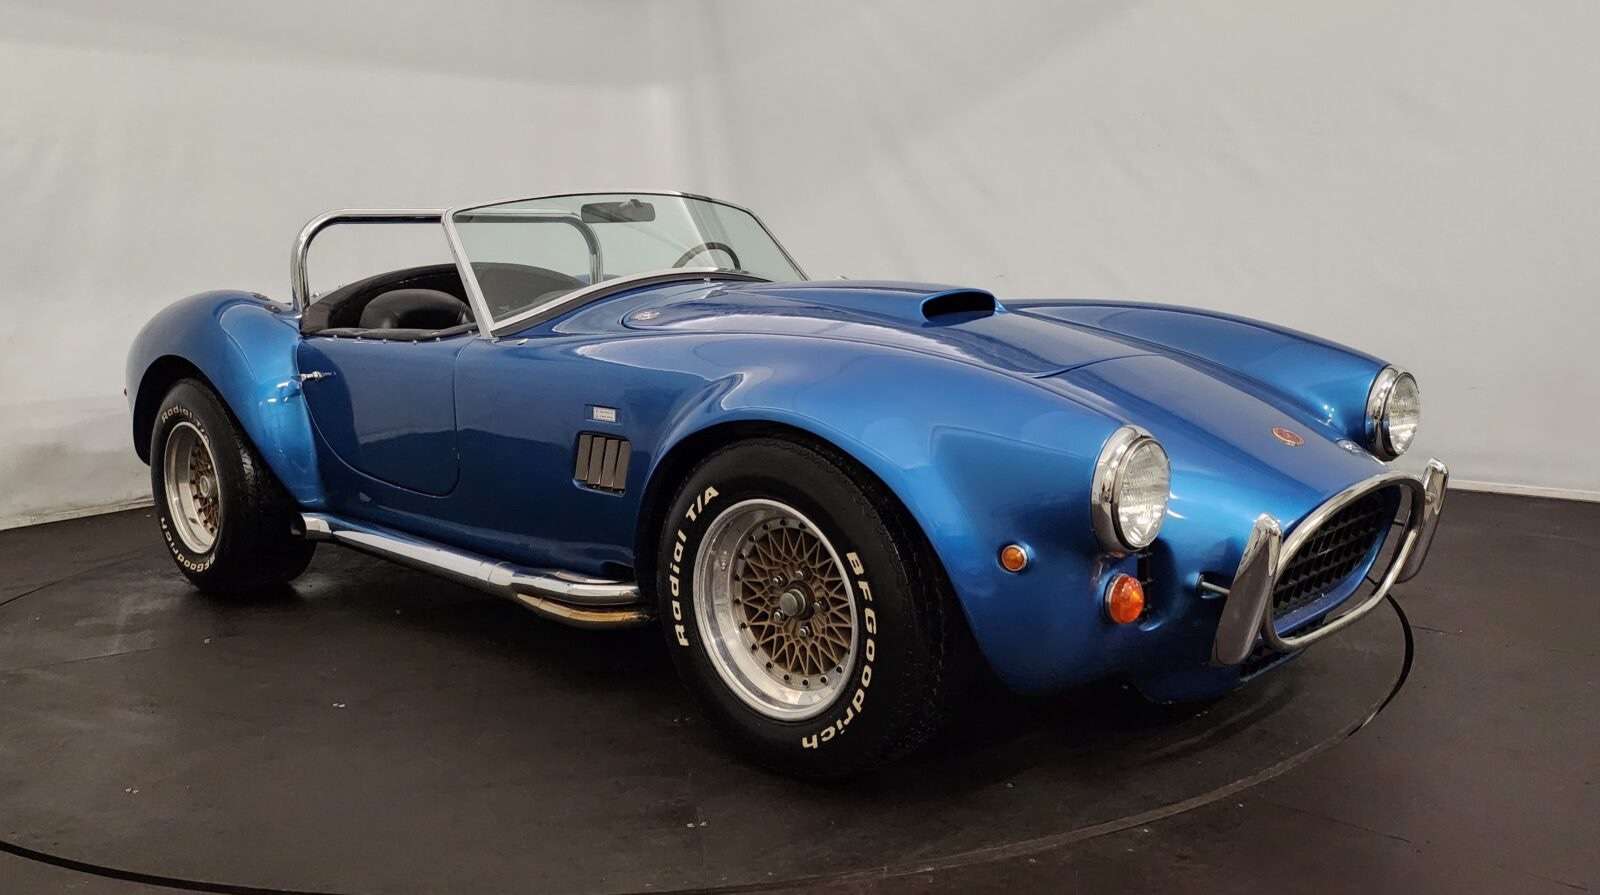 AC Cobra Convertible in Blue used in Créances for € 75,000.-